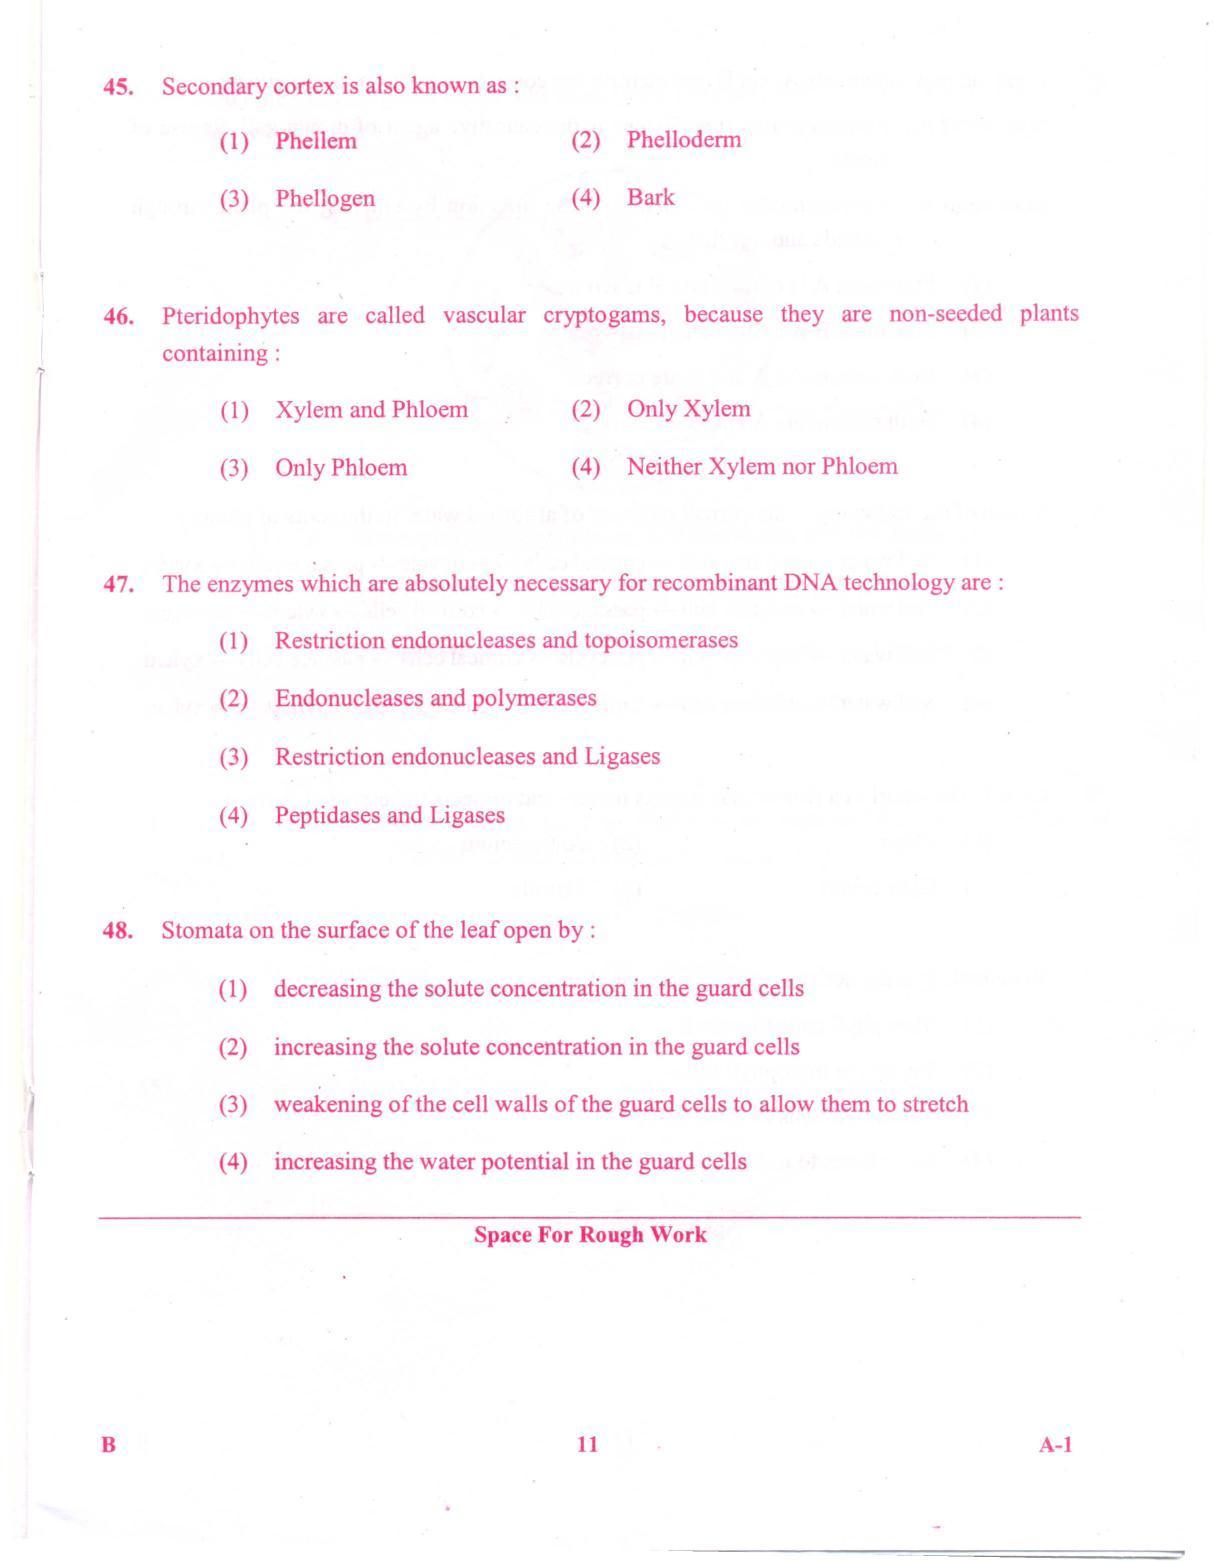 KCET Biology 2012 Question Papers - Page 11